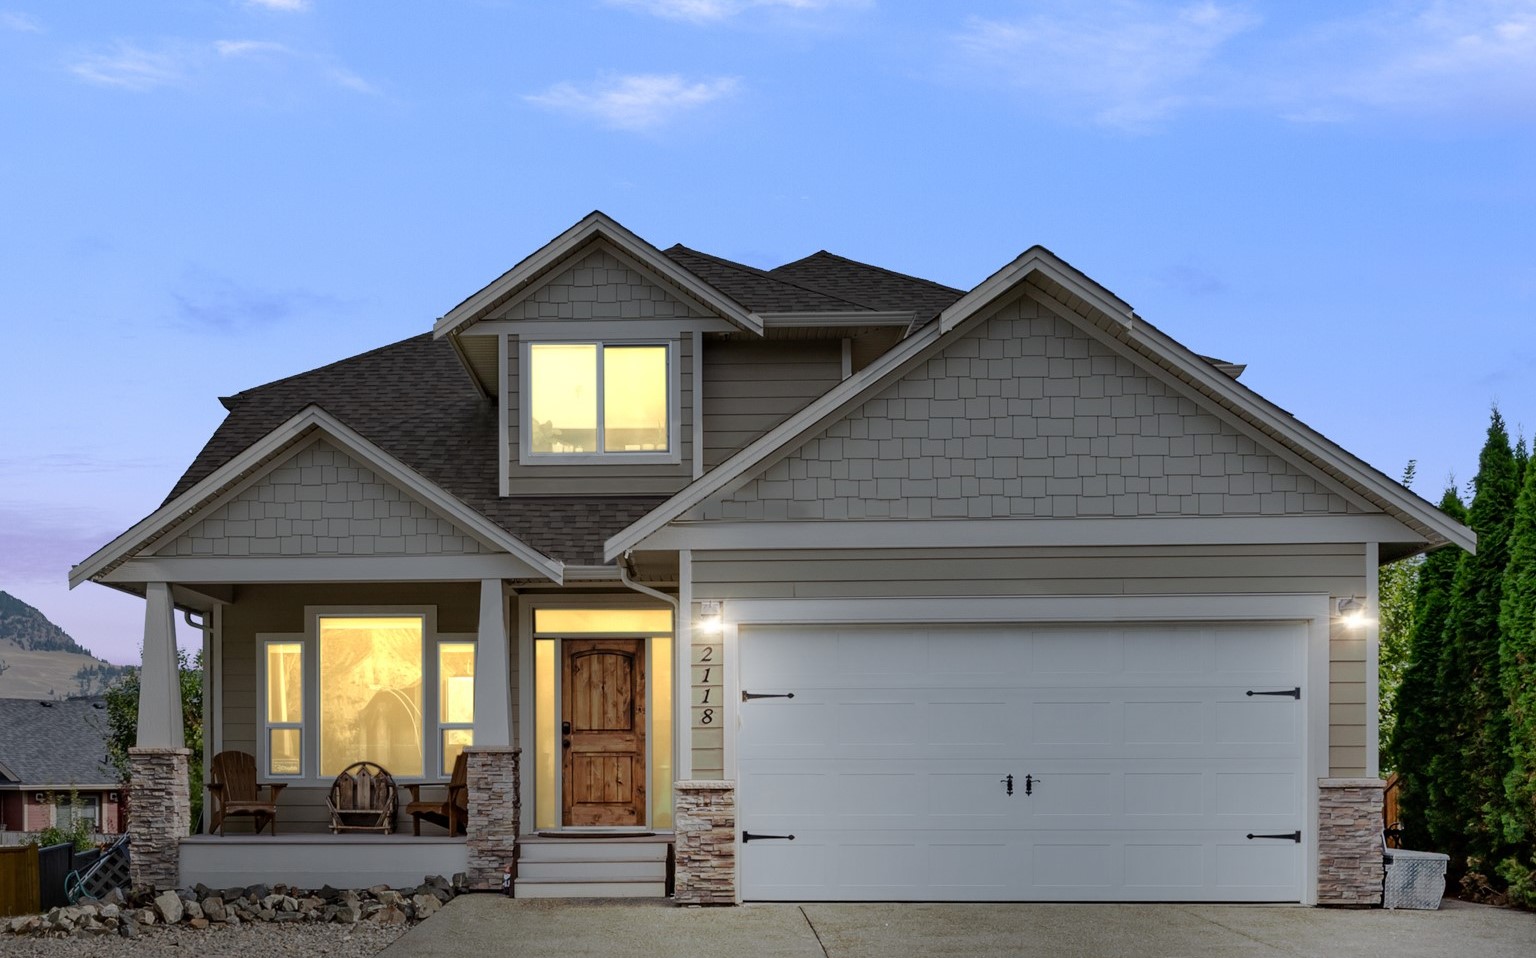 Exterior with lights on | Kamloops Real Estate